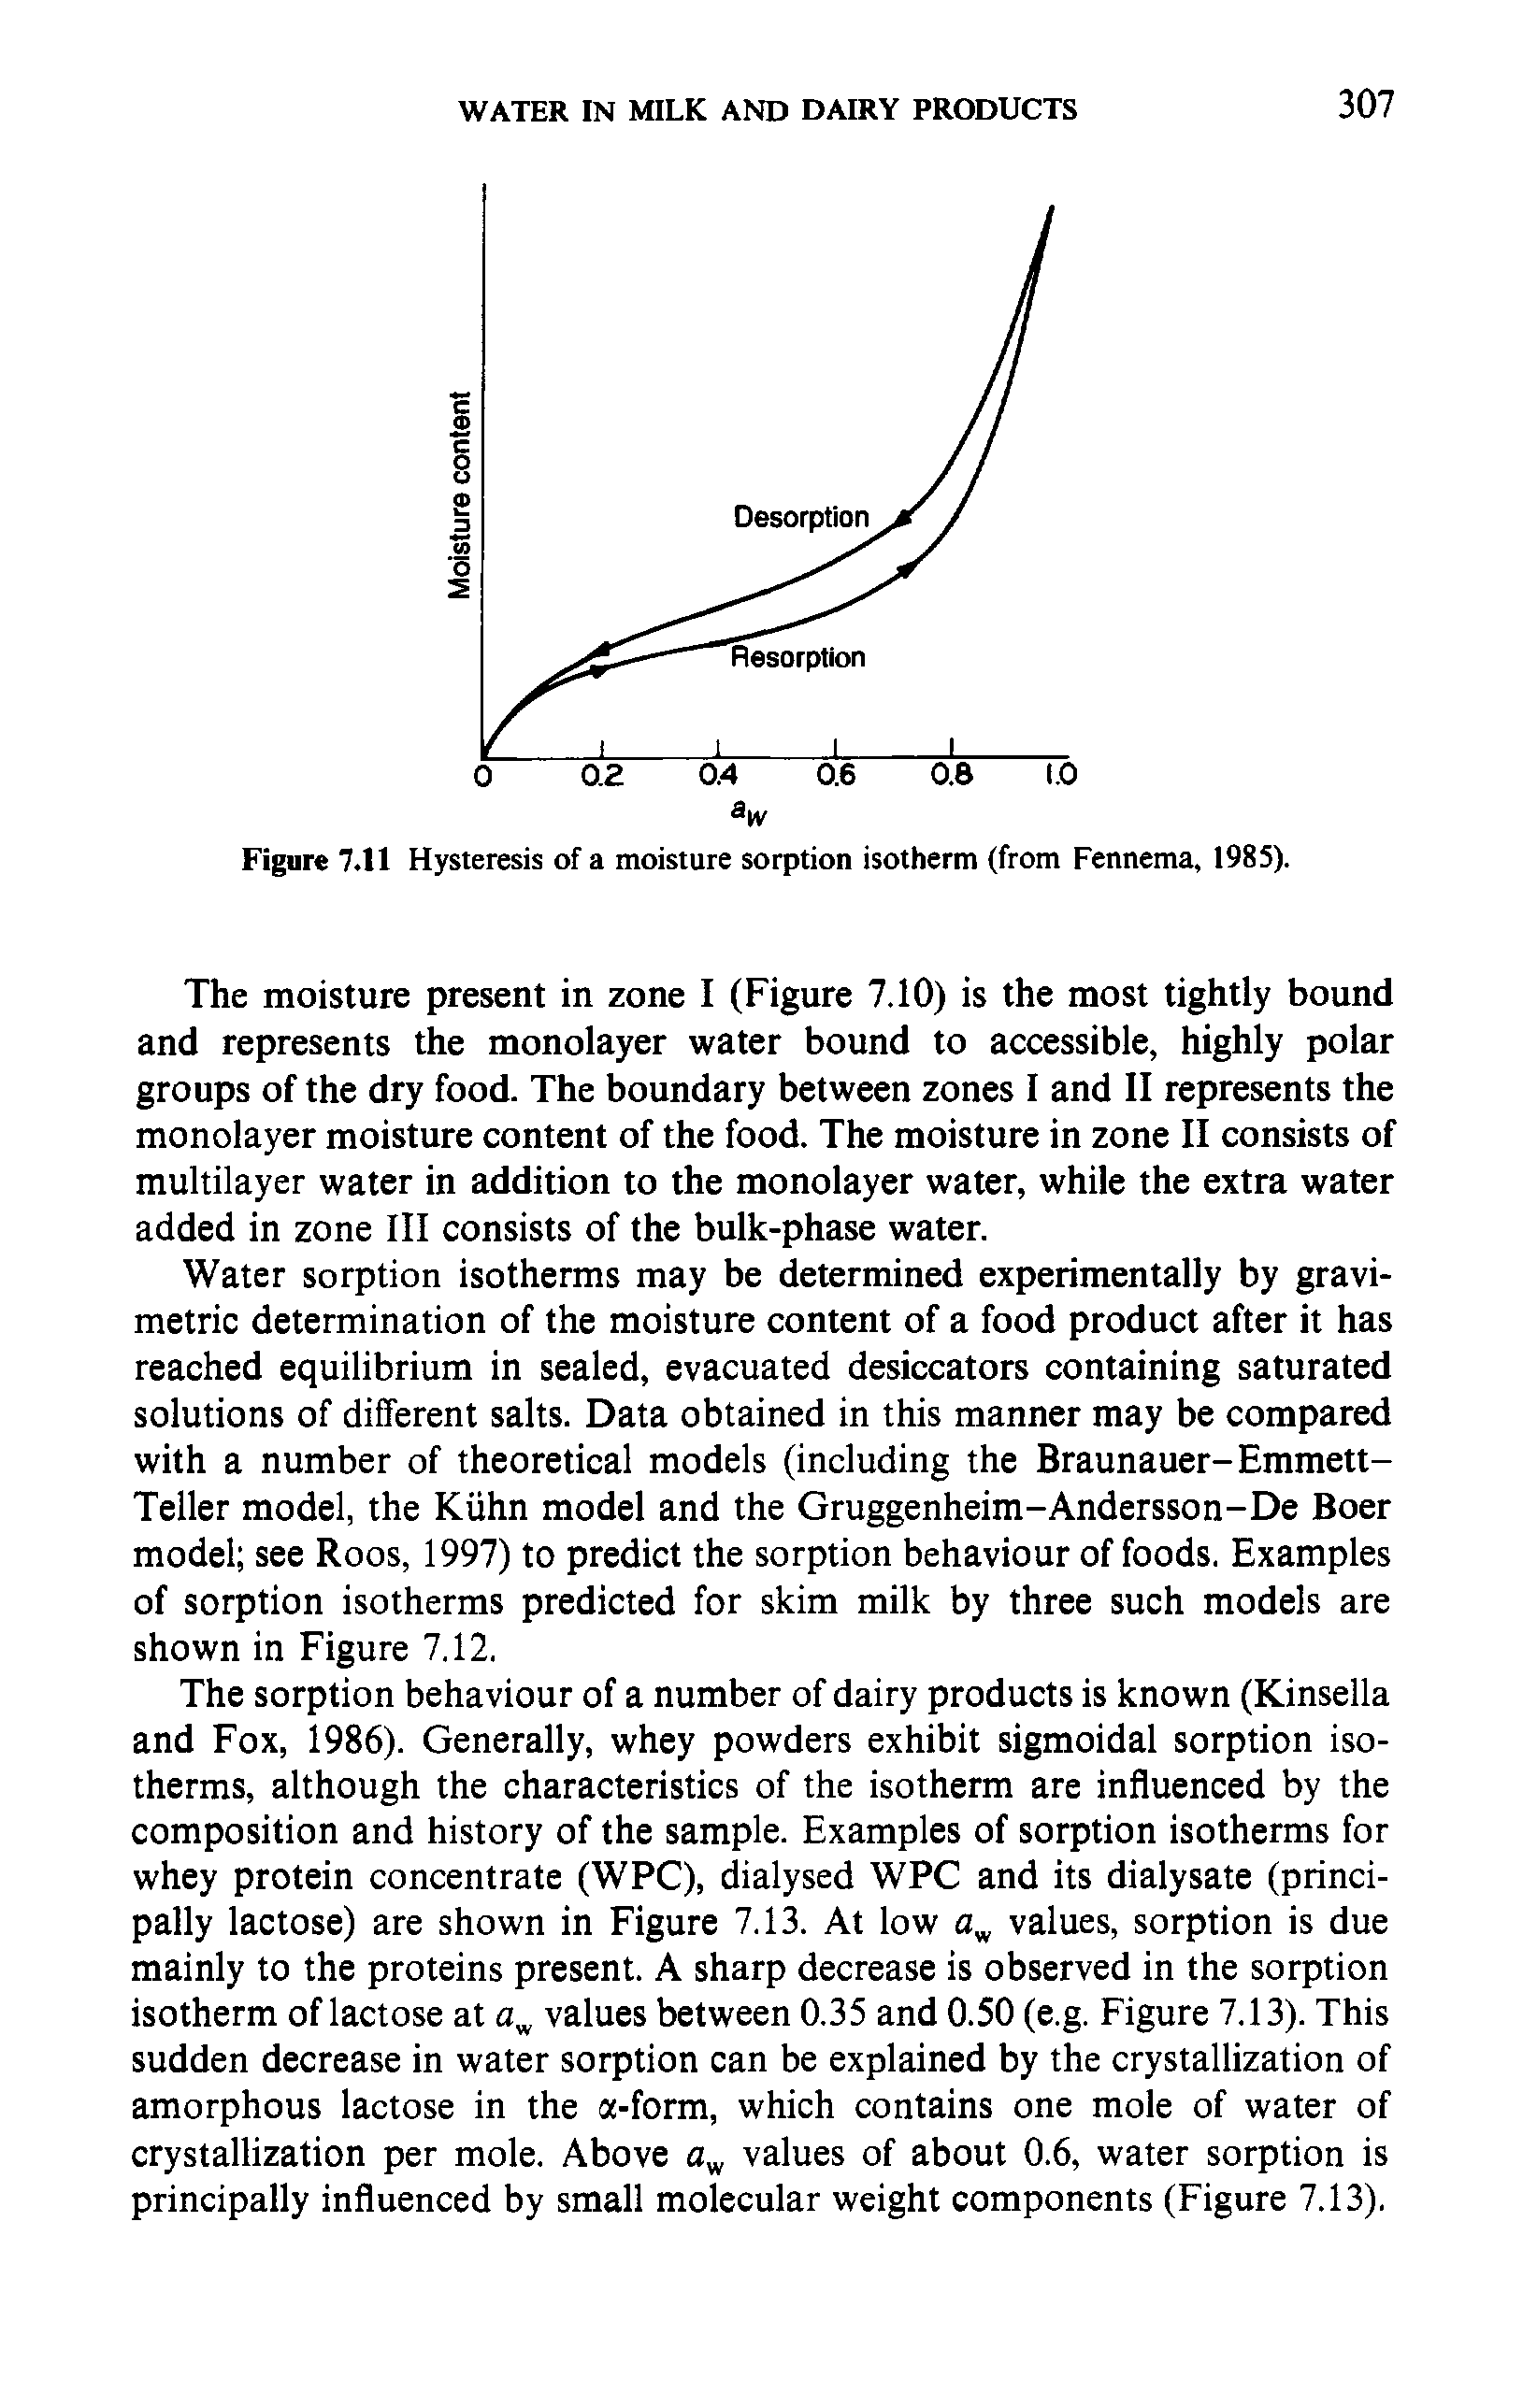 Figure 7.11 Hysteresis of a moisture sorption isotherm (from Fennema, 1985).